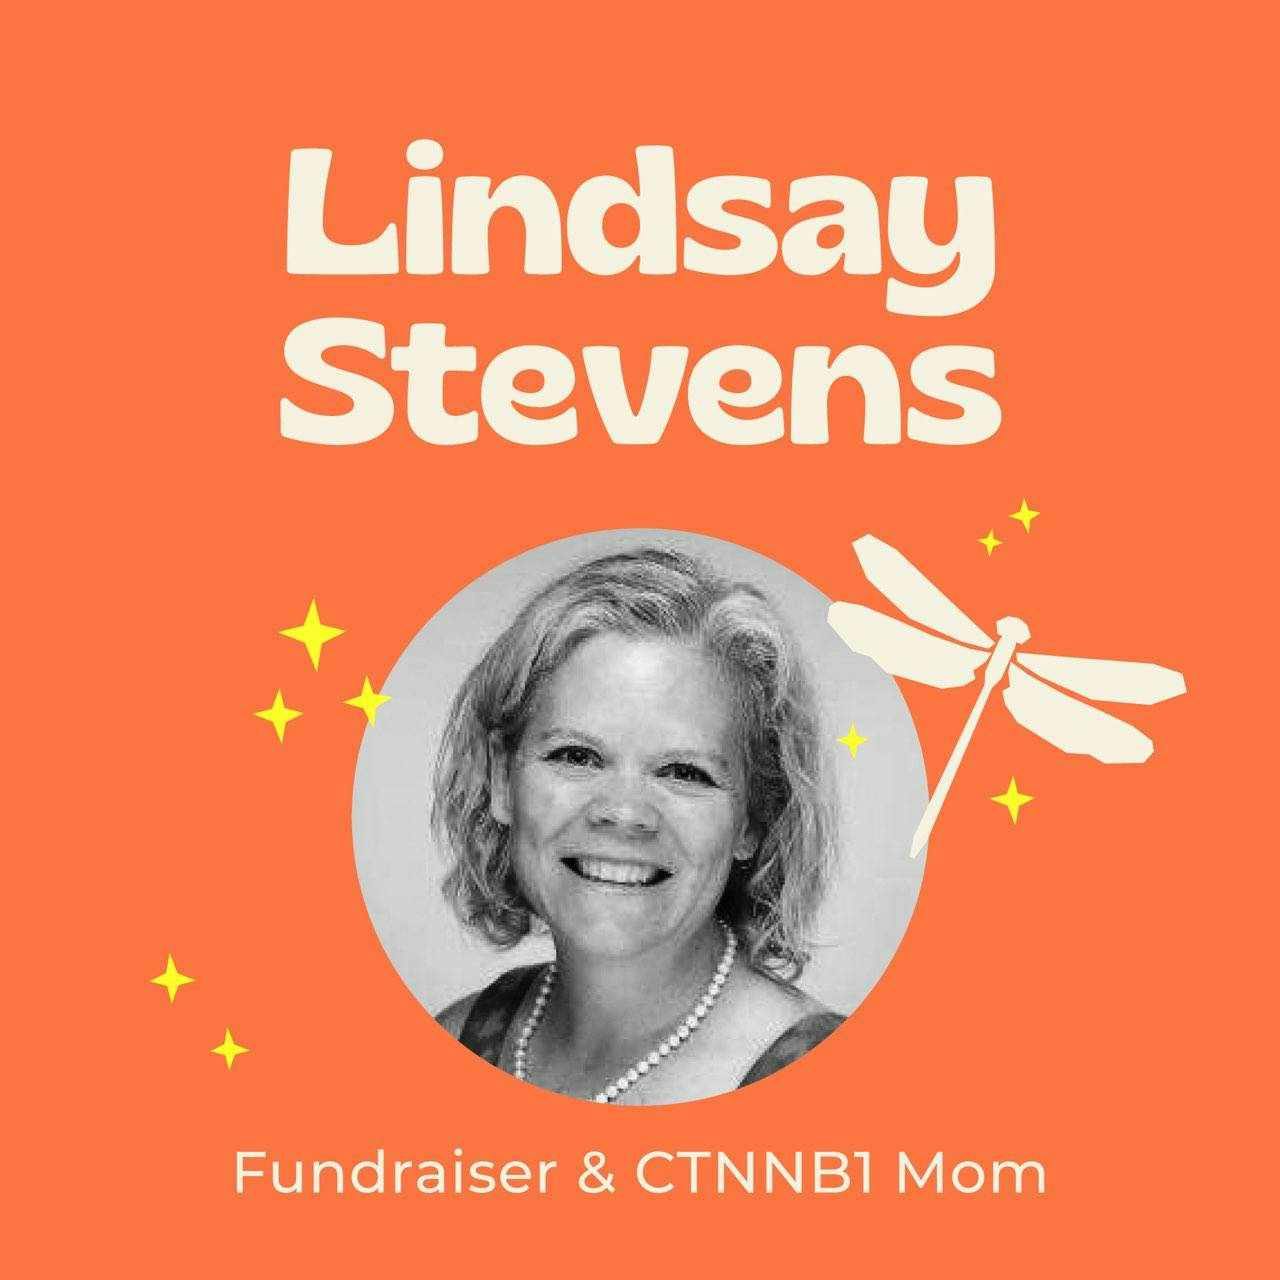 Fundraising Strategies for Patient Advocacy Organizations Raising Money for Rare Disease Research with Lindsay Stevens